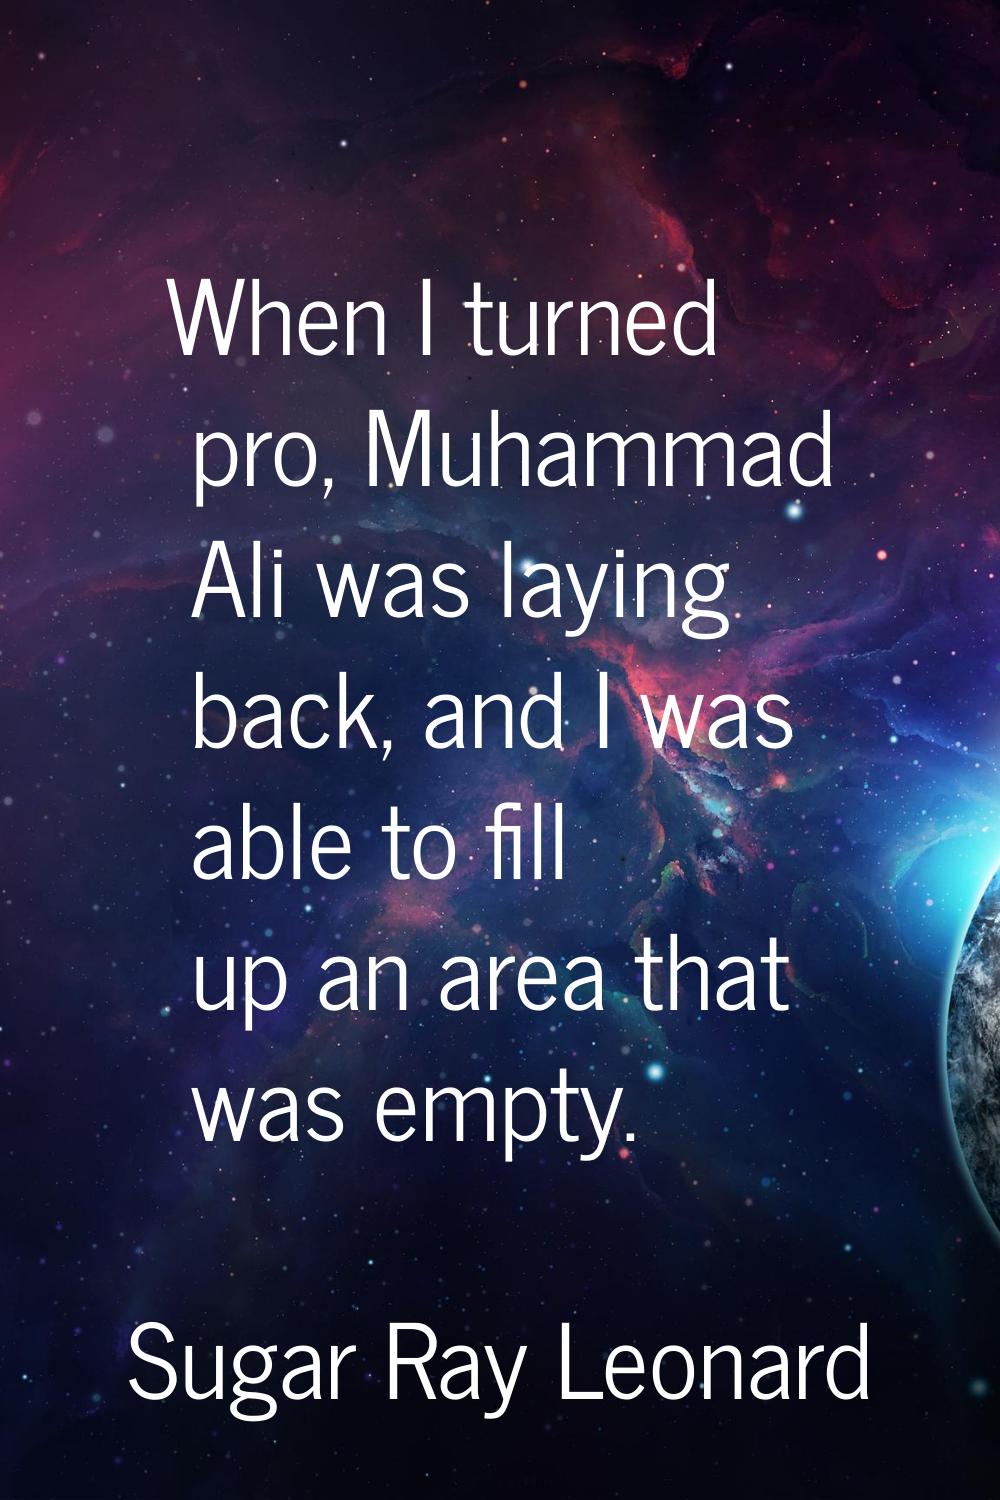 When I turned pro, Muhammad Ali was laying back, and I was able to fill up an area that was empty.